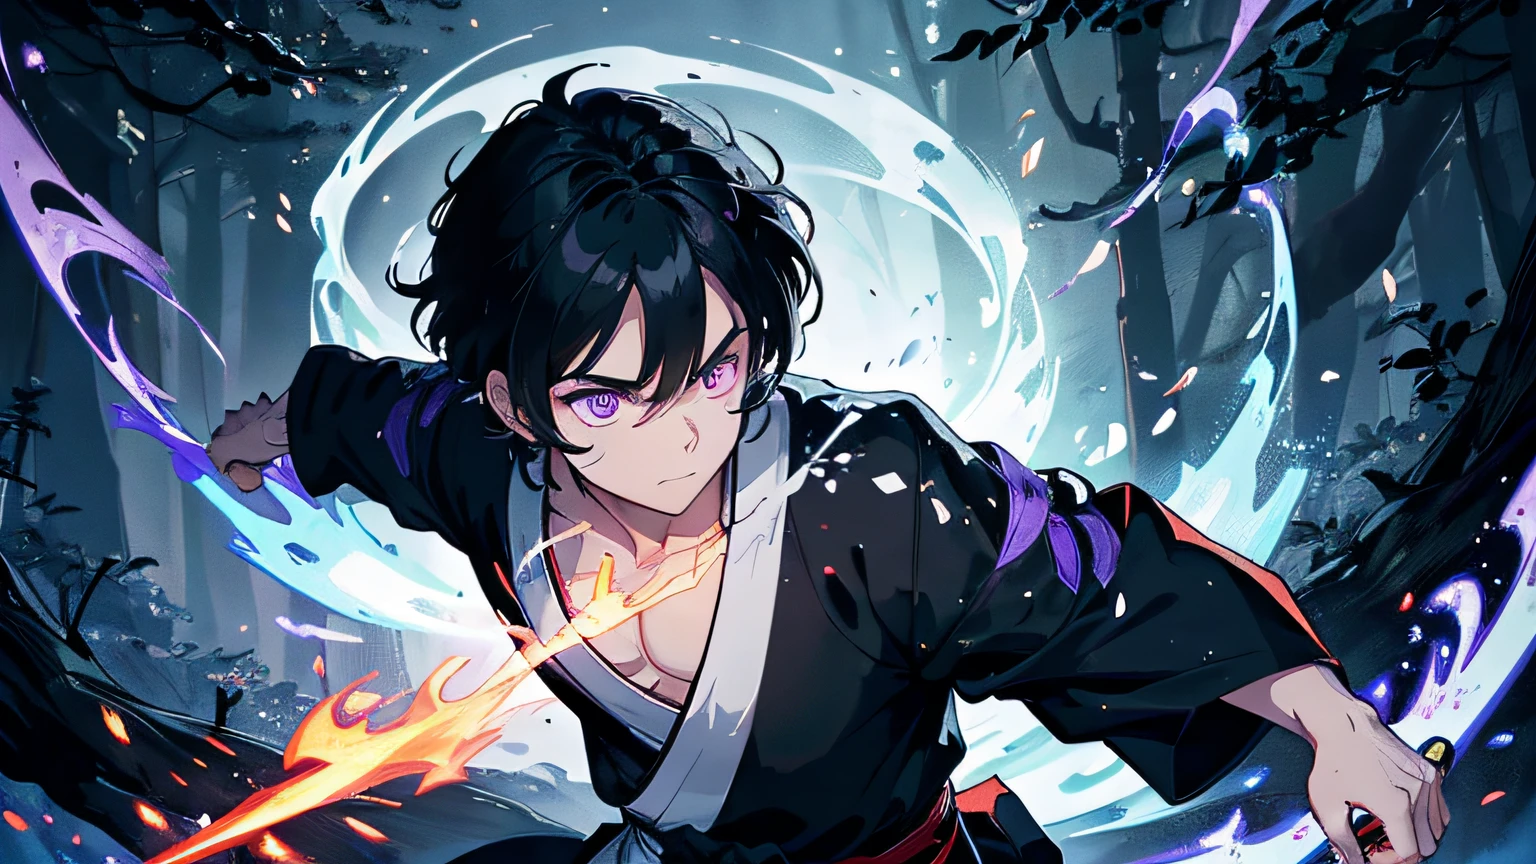 a boy with black hair. he is a righteous samurai who fight evil. he wear white and black kimono. he hold a sword with flames coming out from his sword. the background is in the forest. Masterpiece, high-resolution, detailed eyes, purple eye color. The background is a swirling blue flame in Katsushika Hokusai style. ray tracing, dynamic lighting.